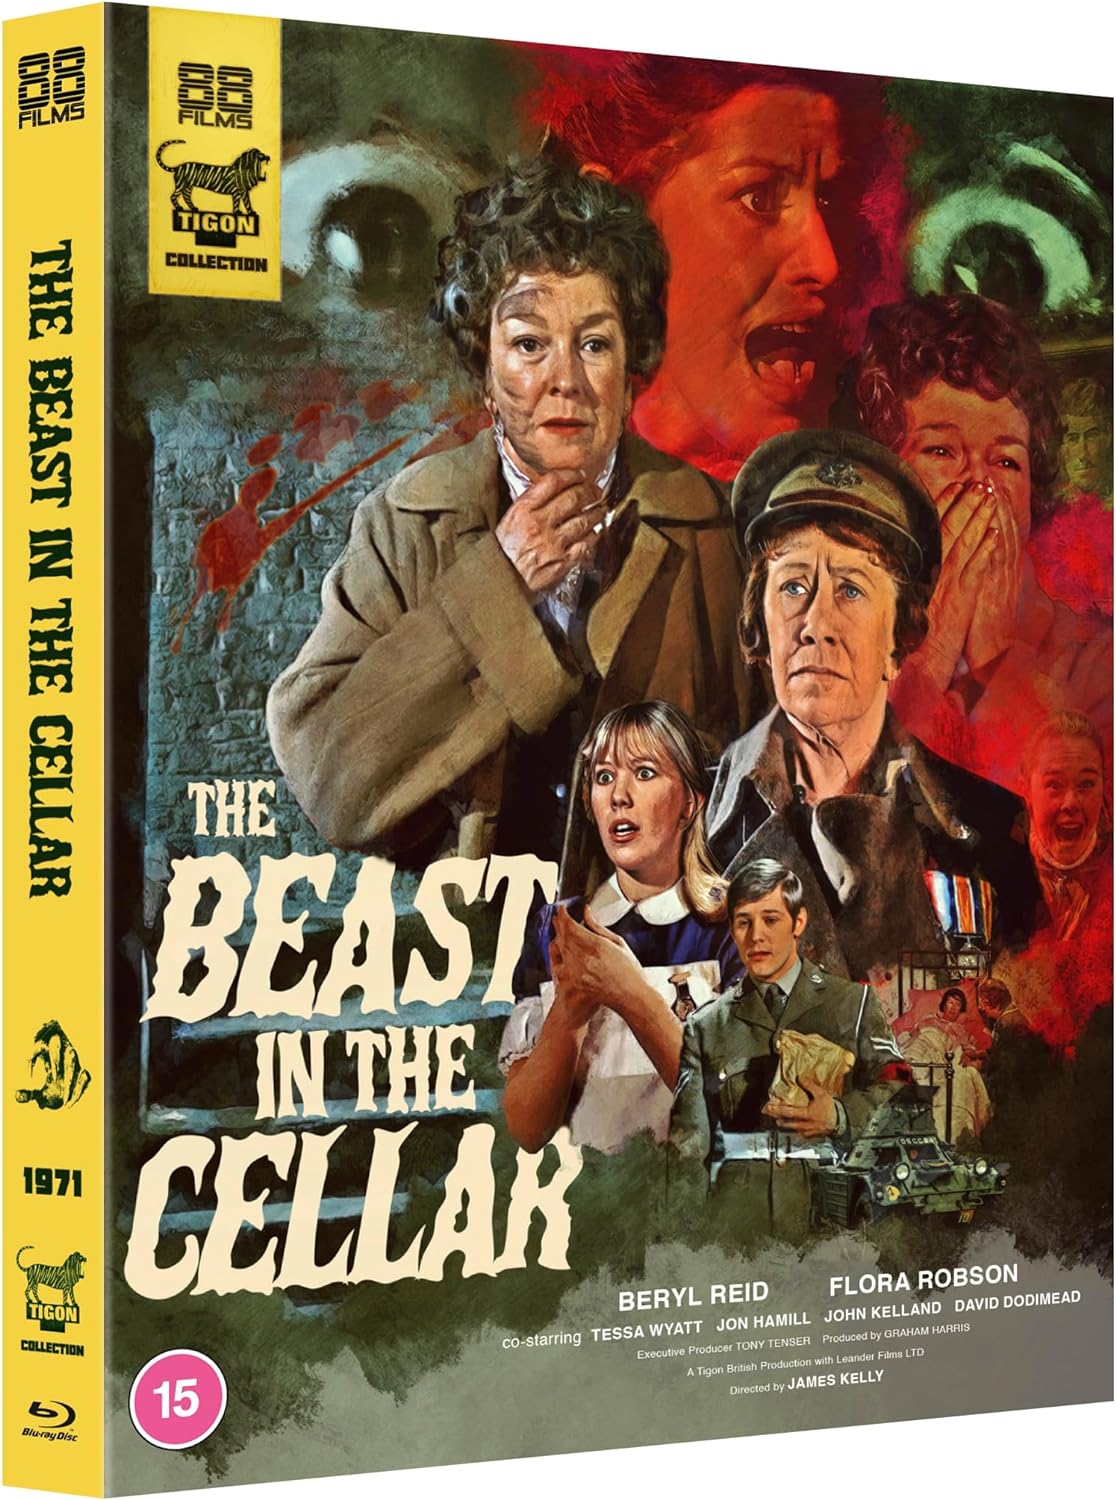 Beast in the Cellar Blu-ray with Slipcover (88 Films/Region B) [Preorder]